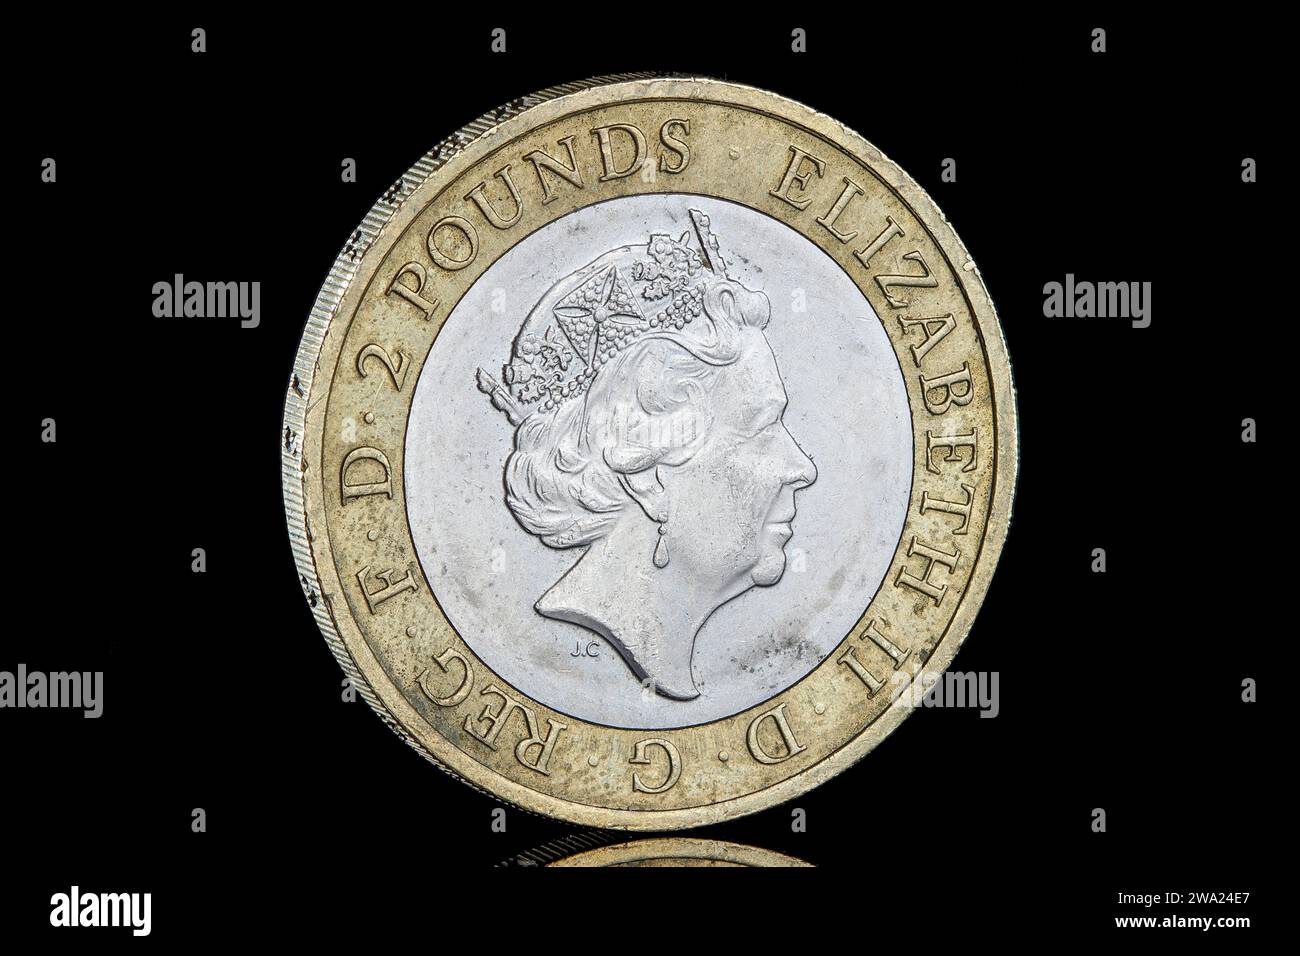 The 5th and final coin portrait of Queen Elizabeth II on a bimetallic £2 coin. The effigy was designed by Jody Clark and used on Stock Photo